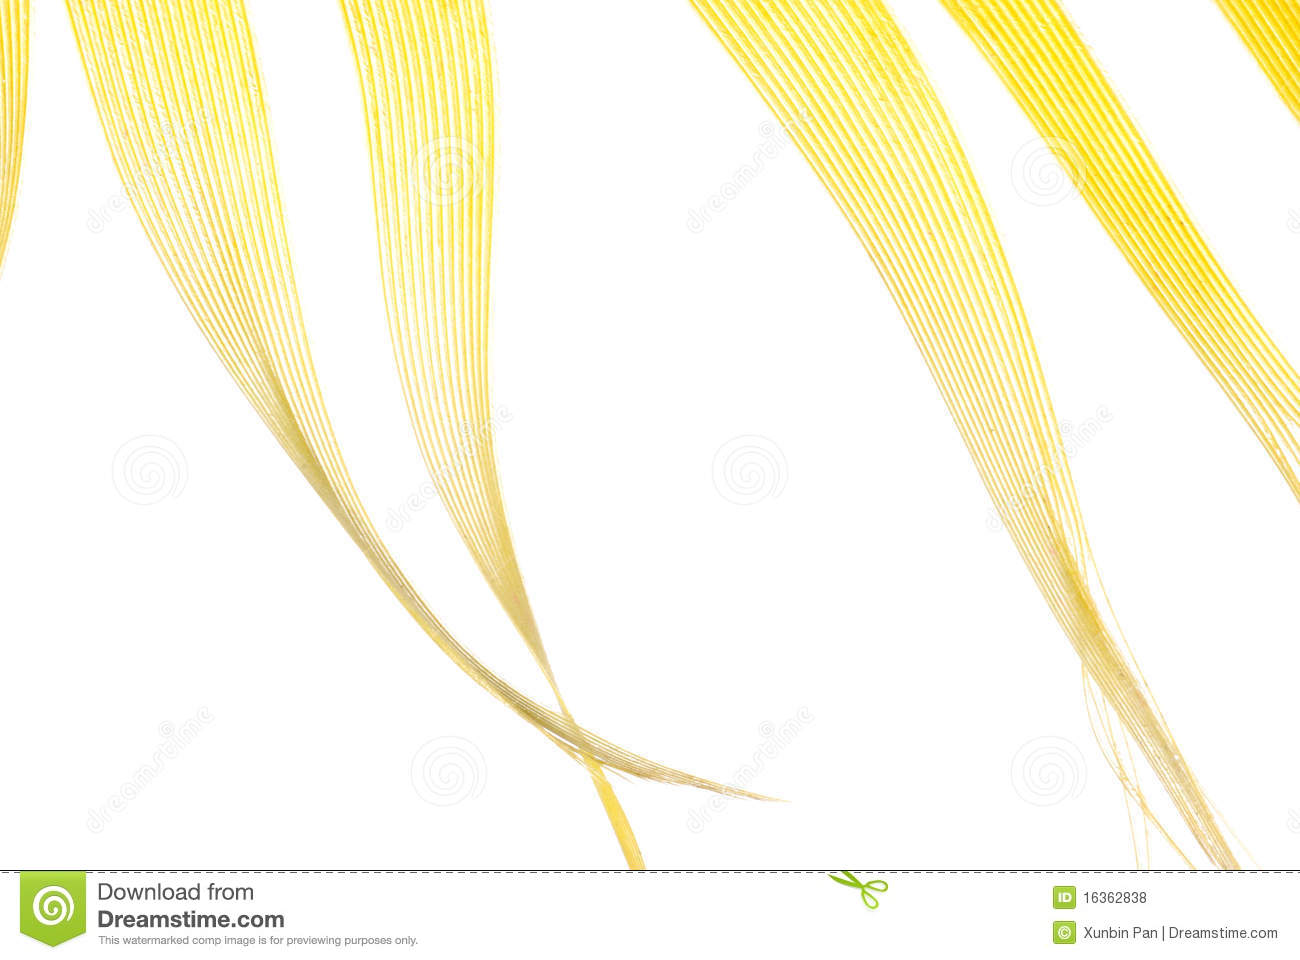 Yellow Feather Abstract Texture Royalty Free Stock Photos   Image    